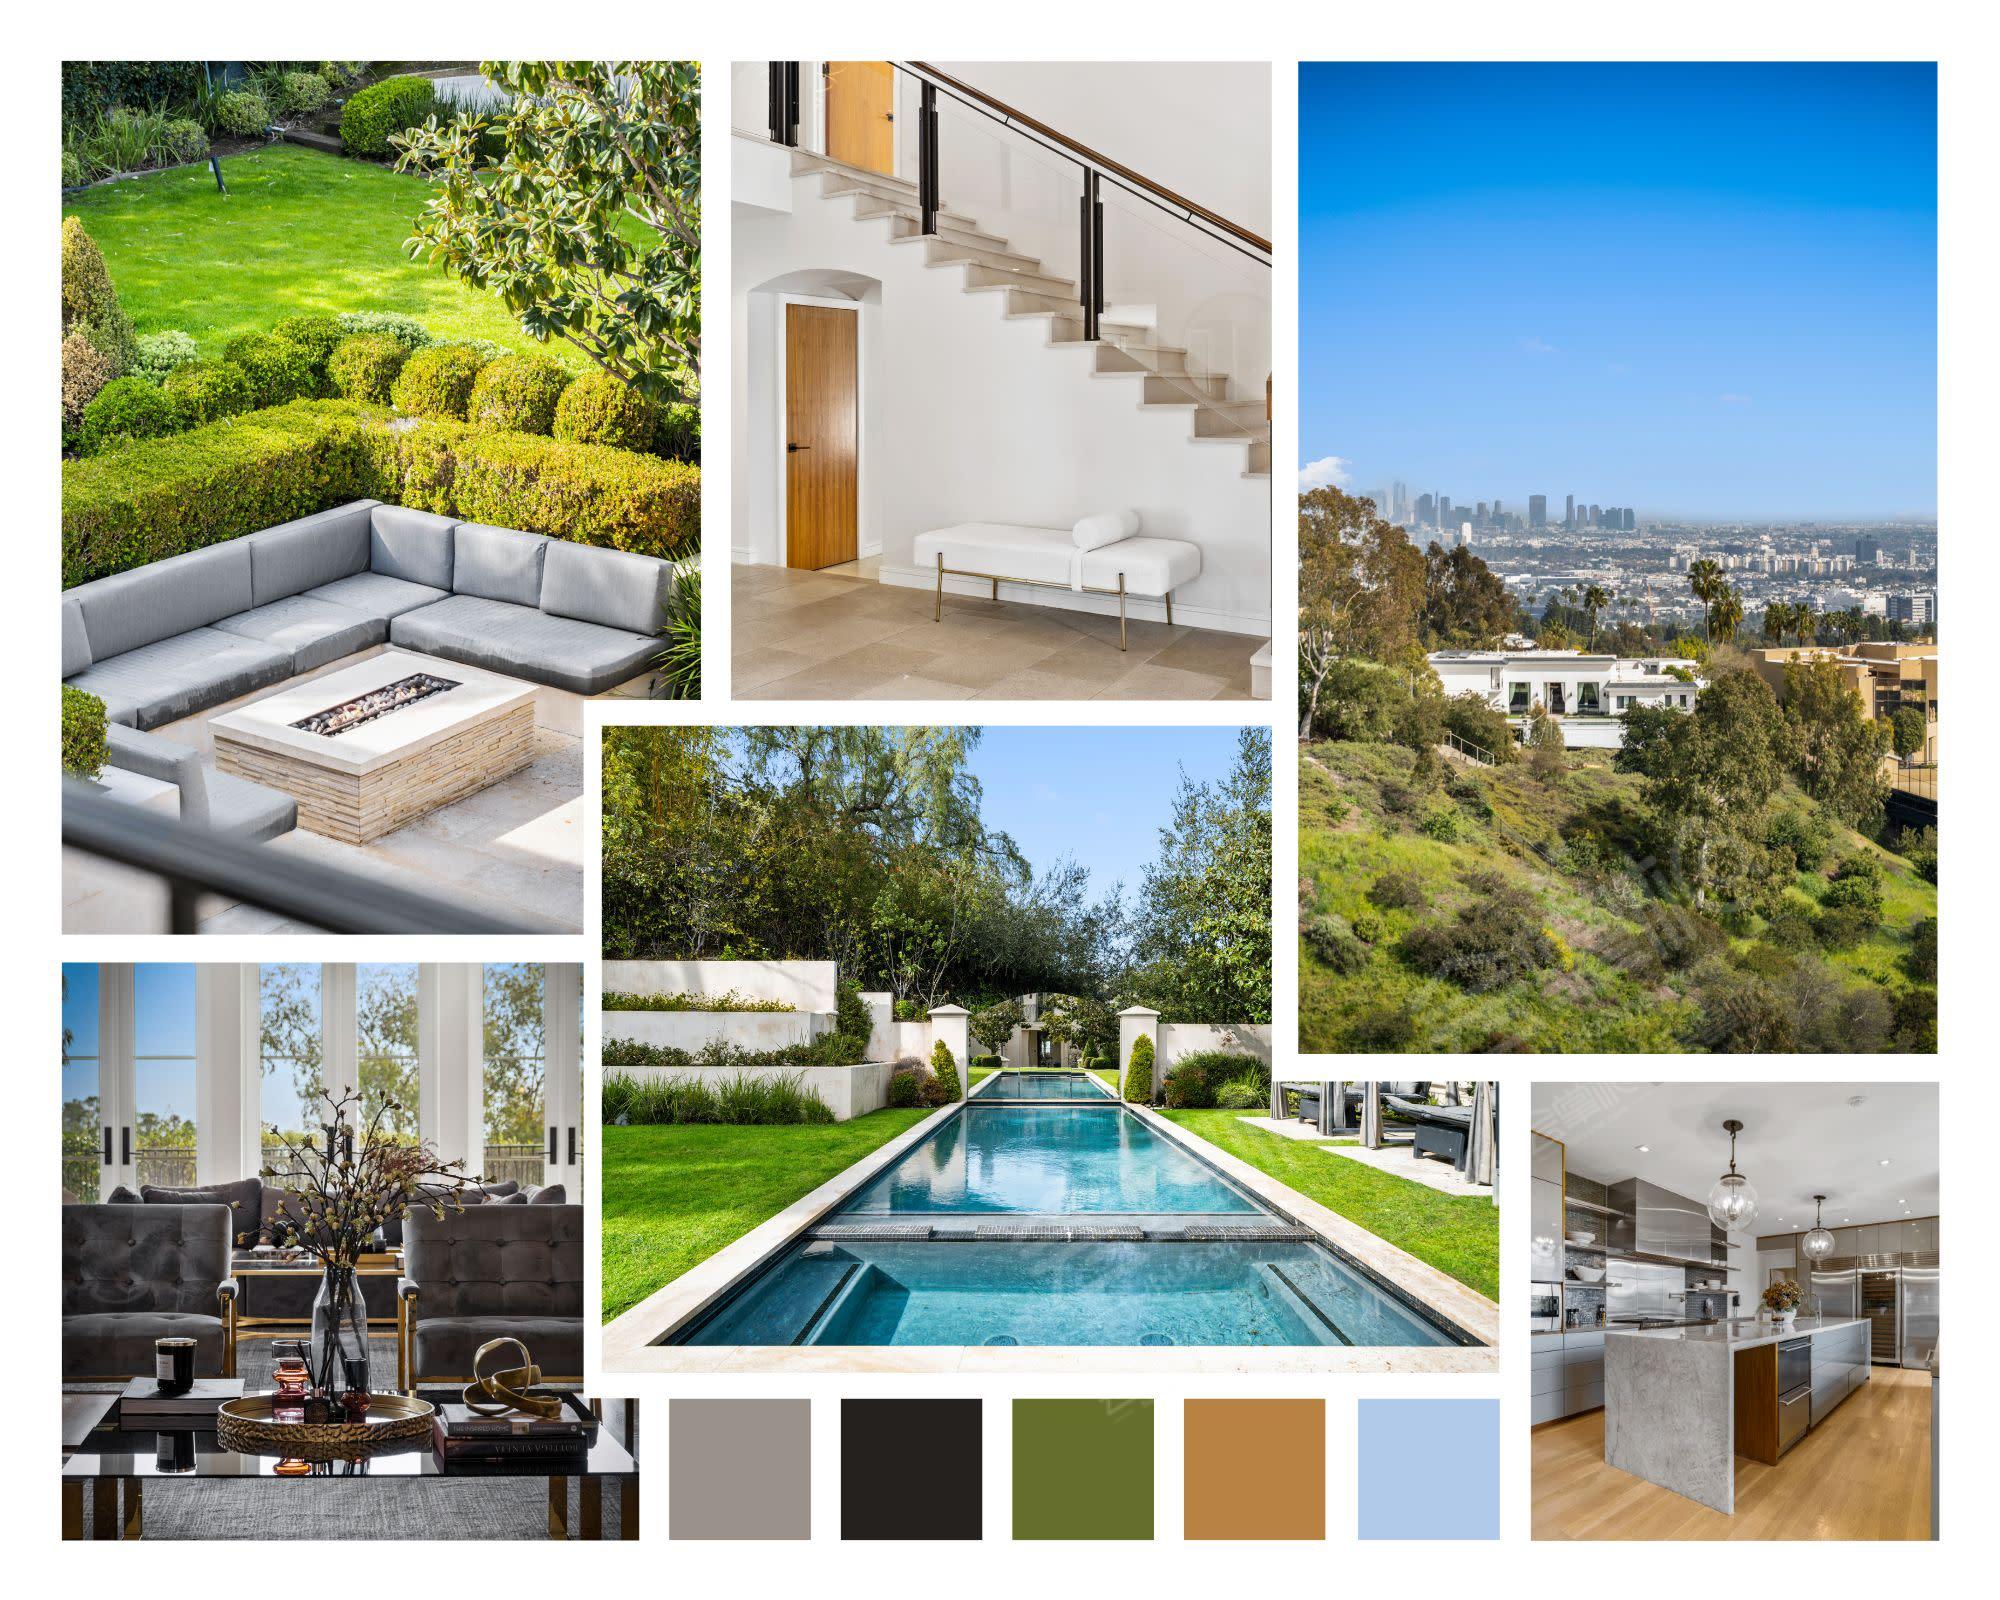 BEVERLY HILLS MODERN LUXURY: PICTURE PERFECT SET